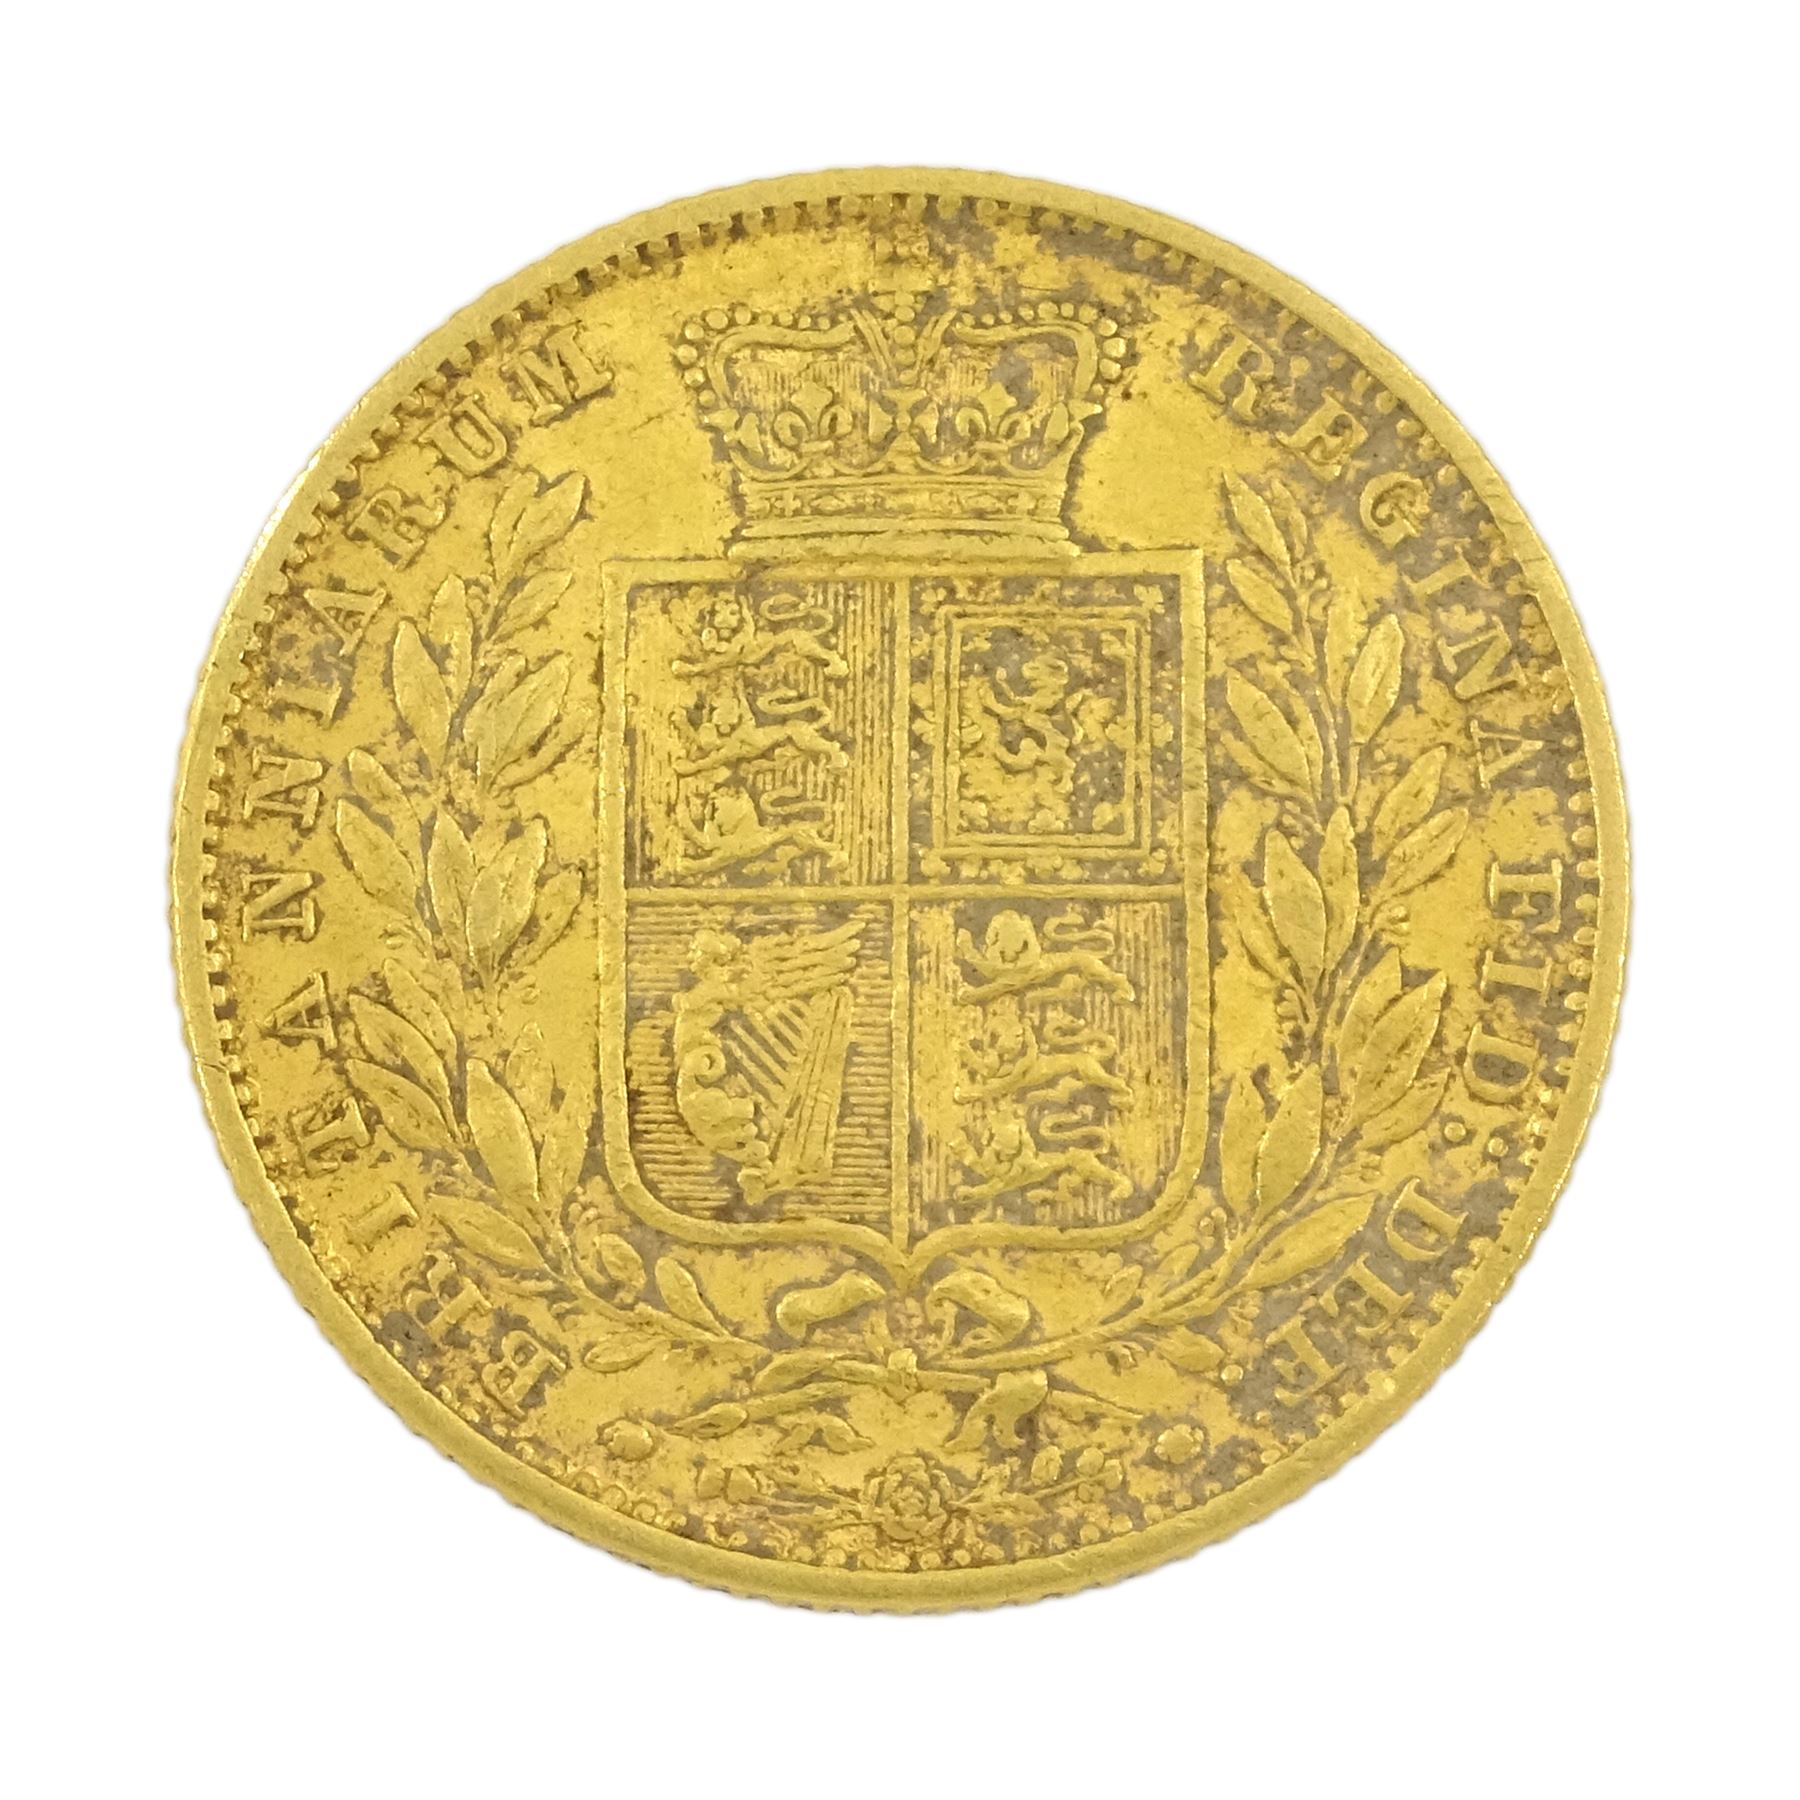 Queen Victoria 1853 gold full sovereign coin - Image 2 of 2